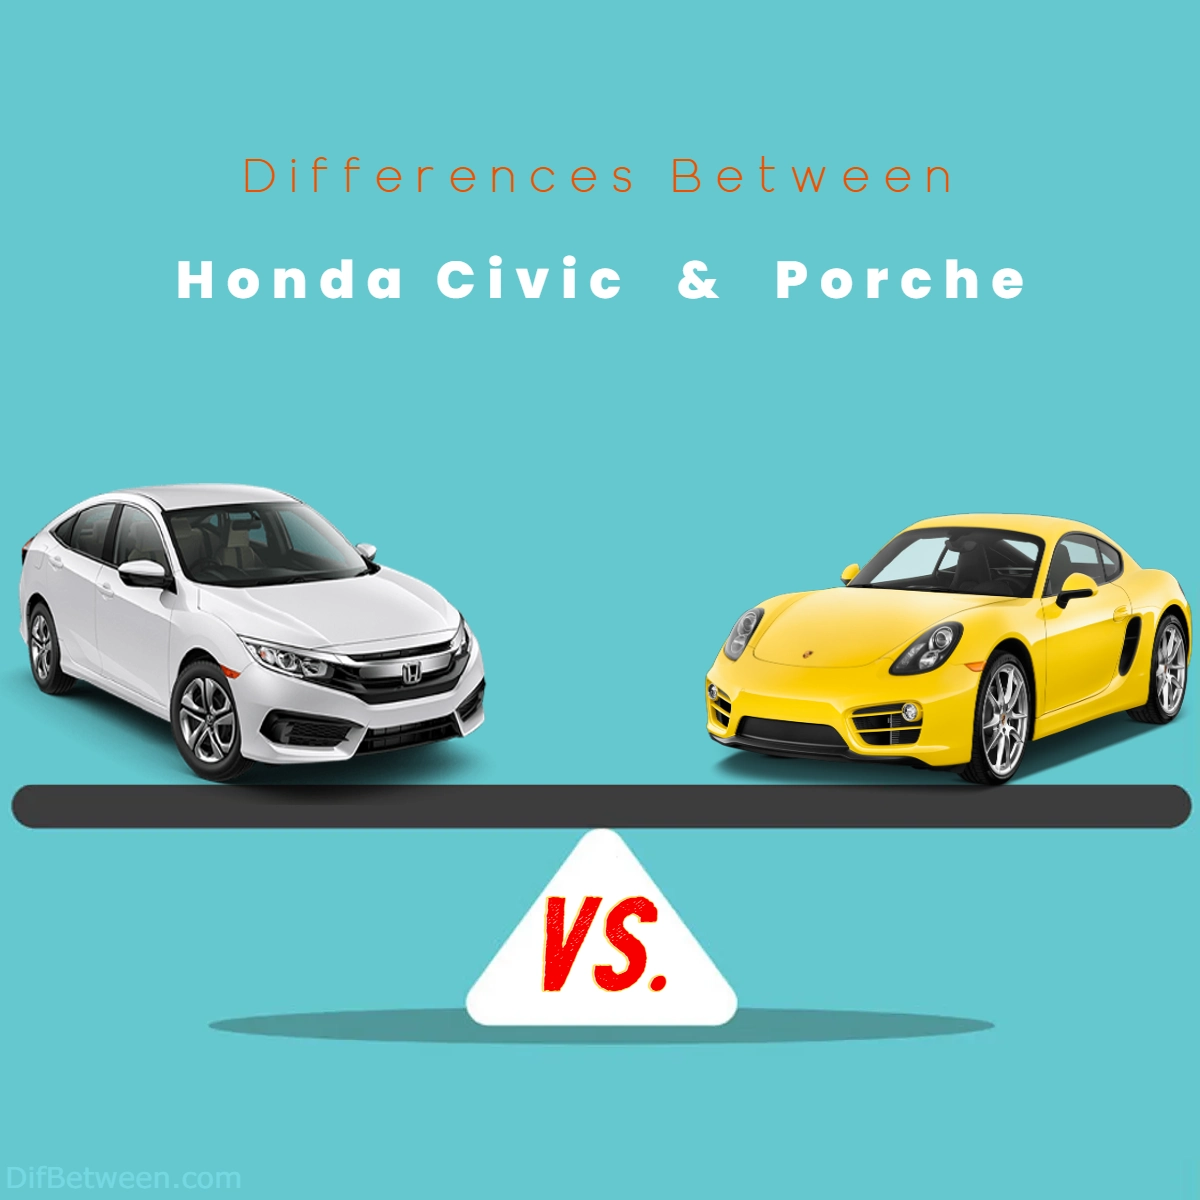 Difference Between Honda Civic and Porche